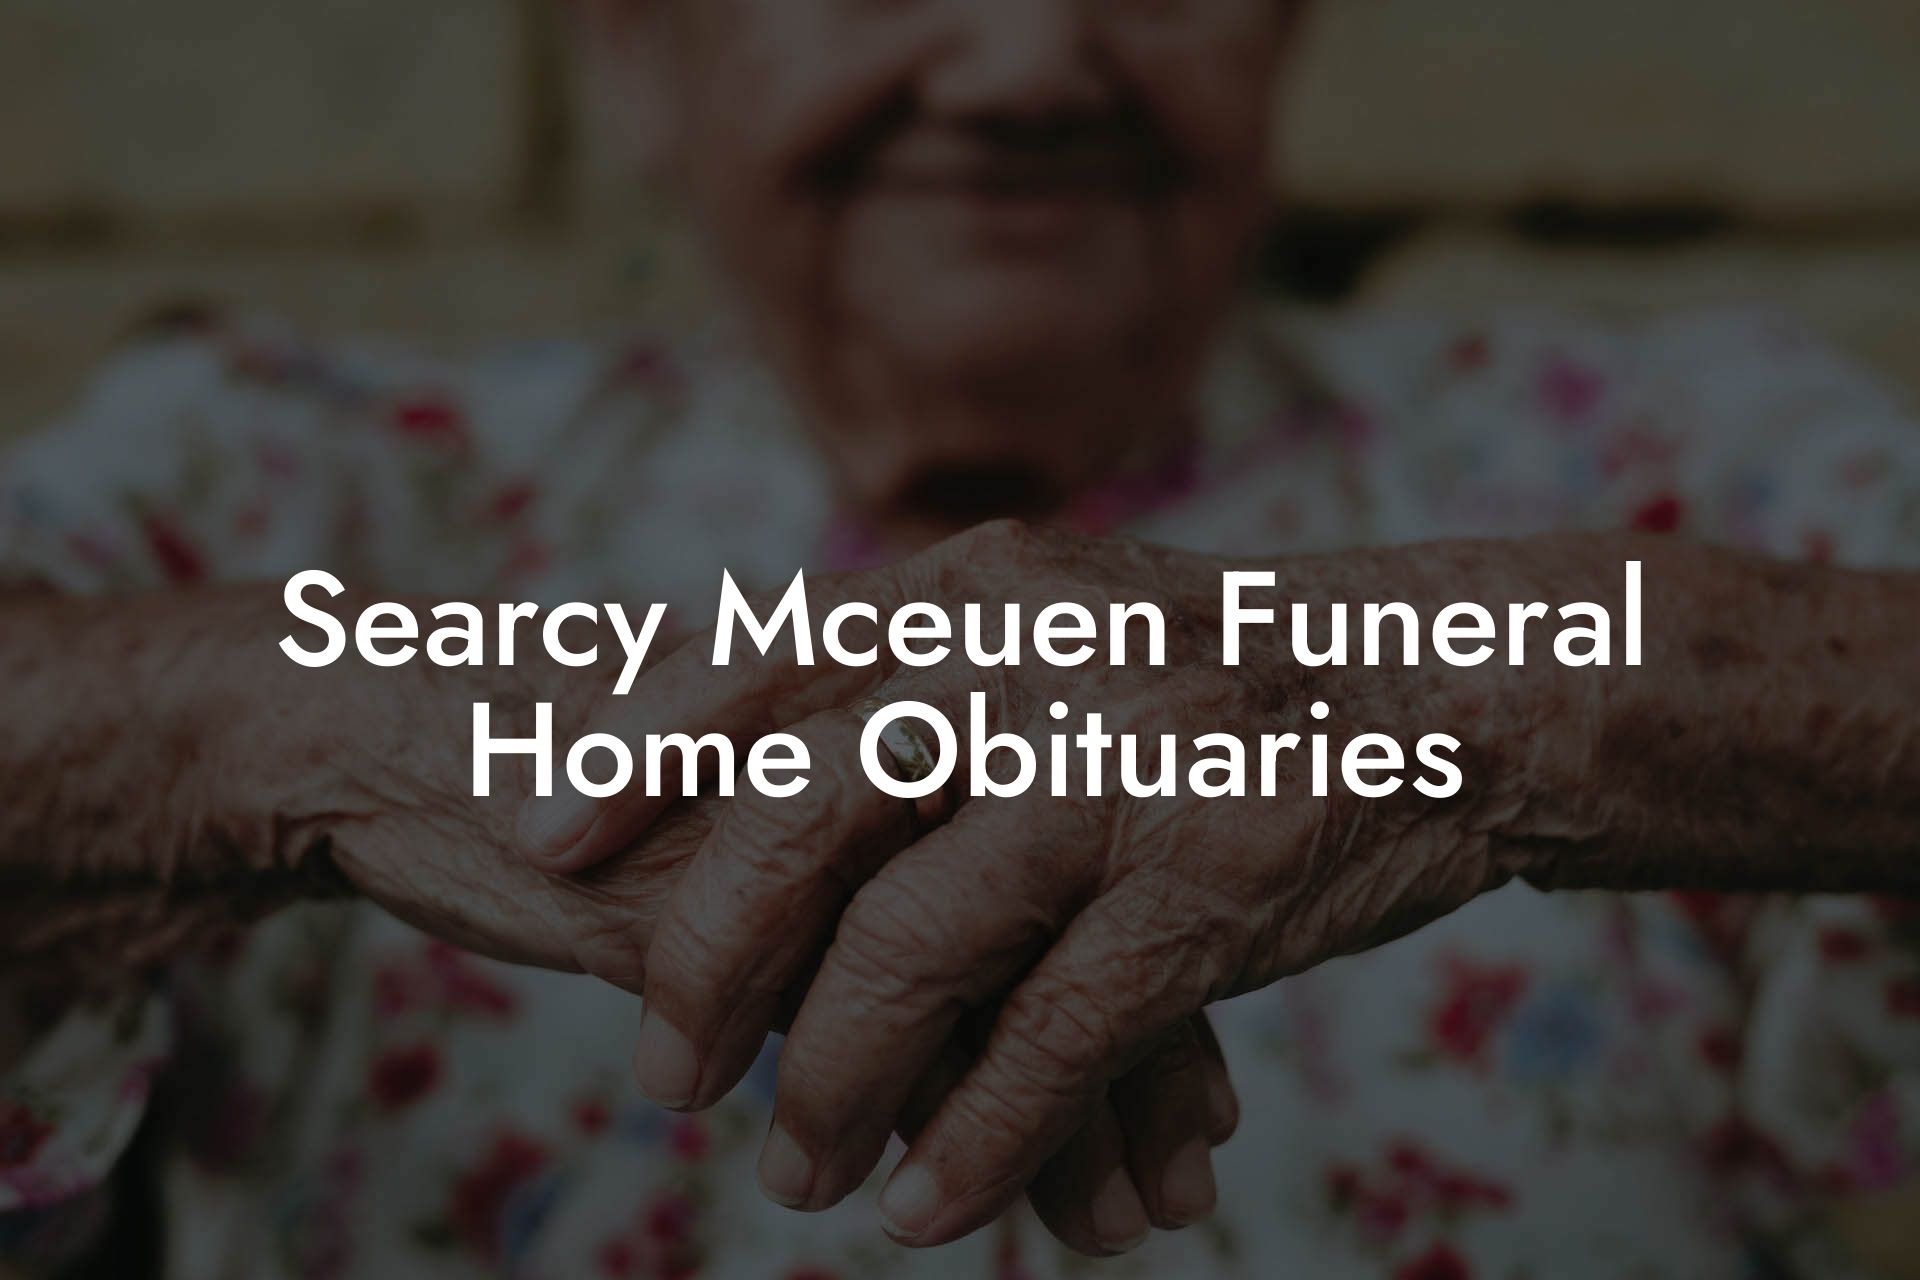 Searcy Mceuen Funeral Home Obituaries